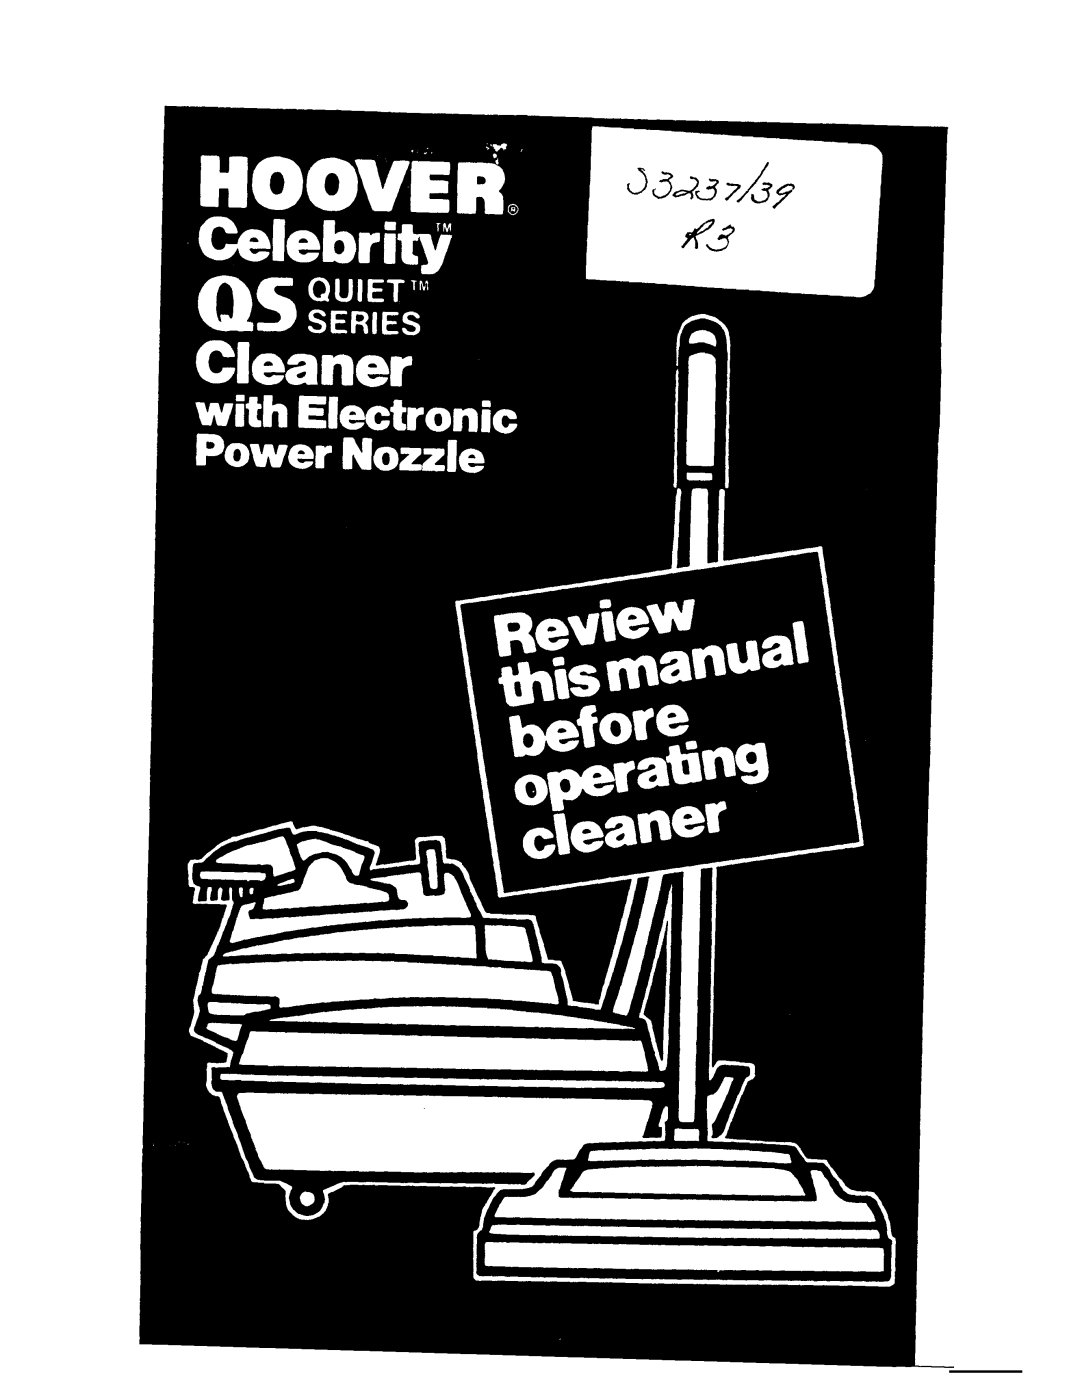 Hoover S3237, S3239 manual 